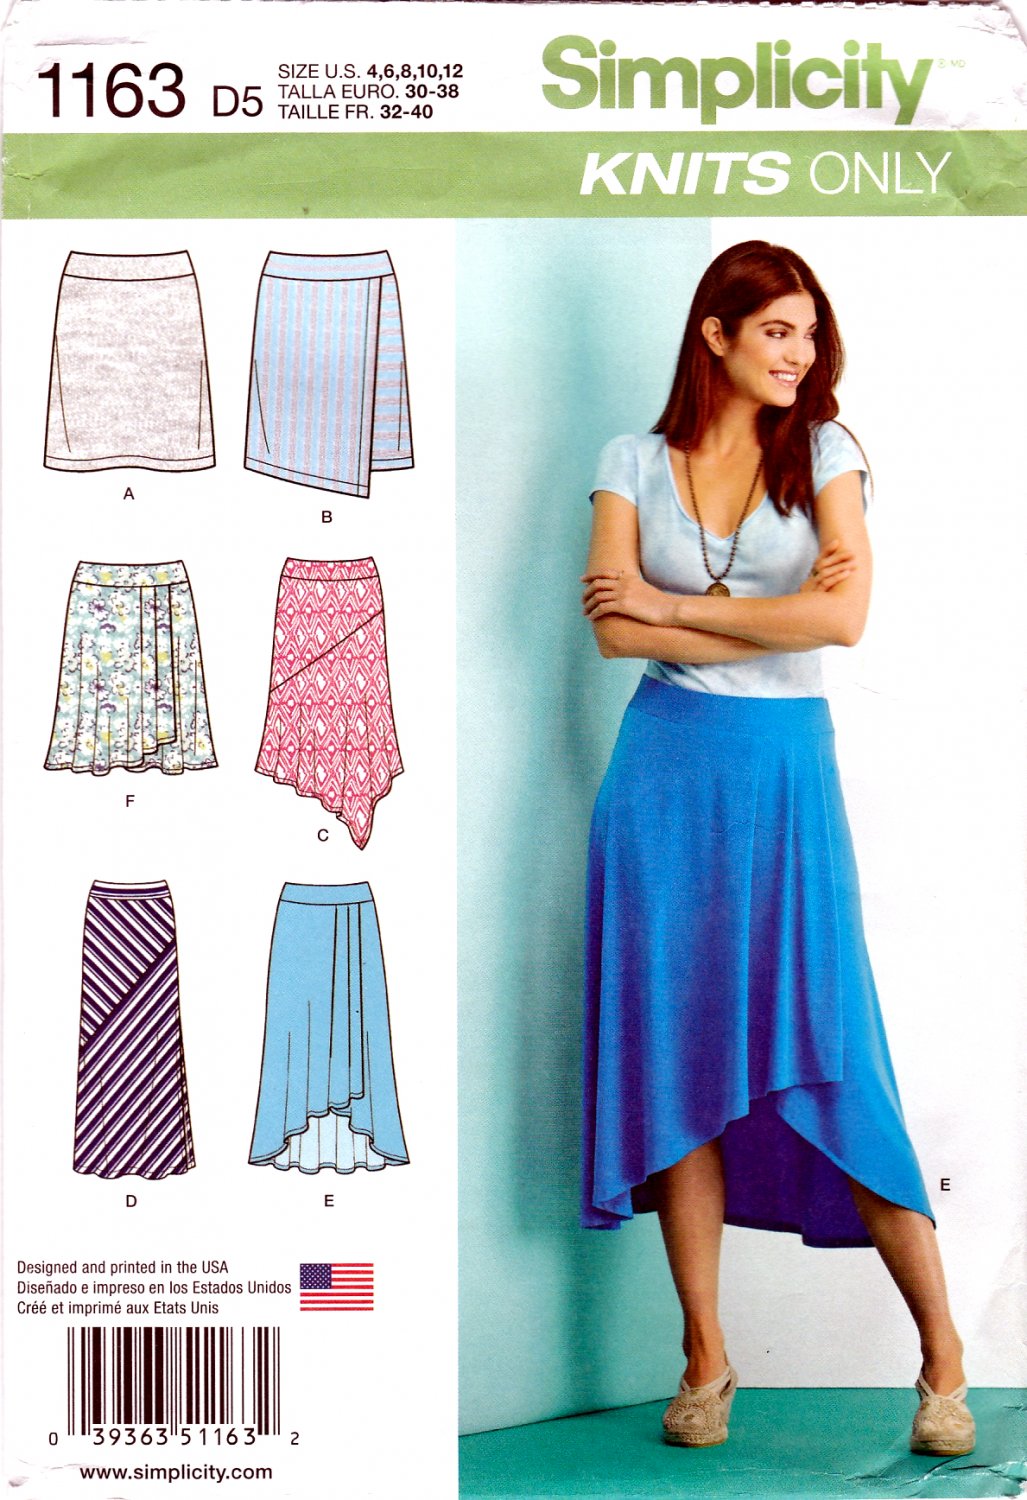 Simplicity 1163 Misses Skirts with Length Variations Sewing Pattern Sizes 4-6-8-10-12